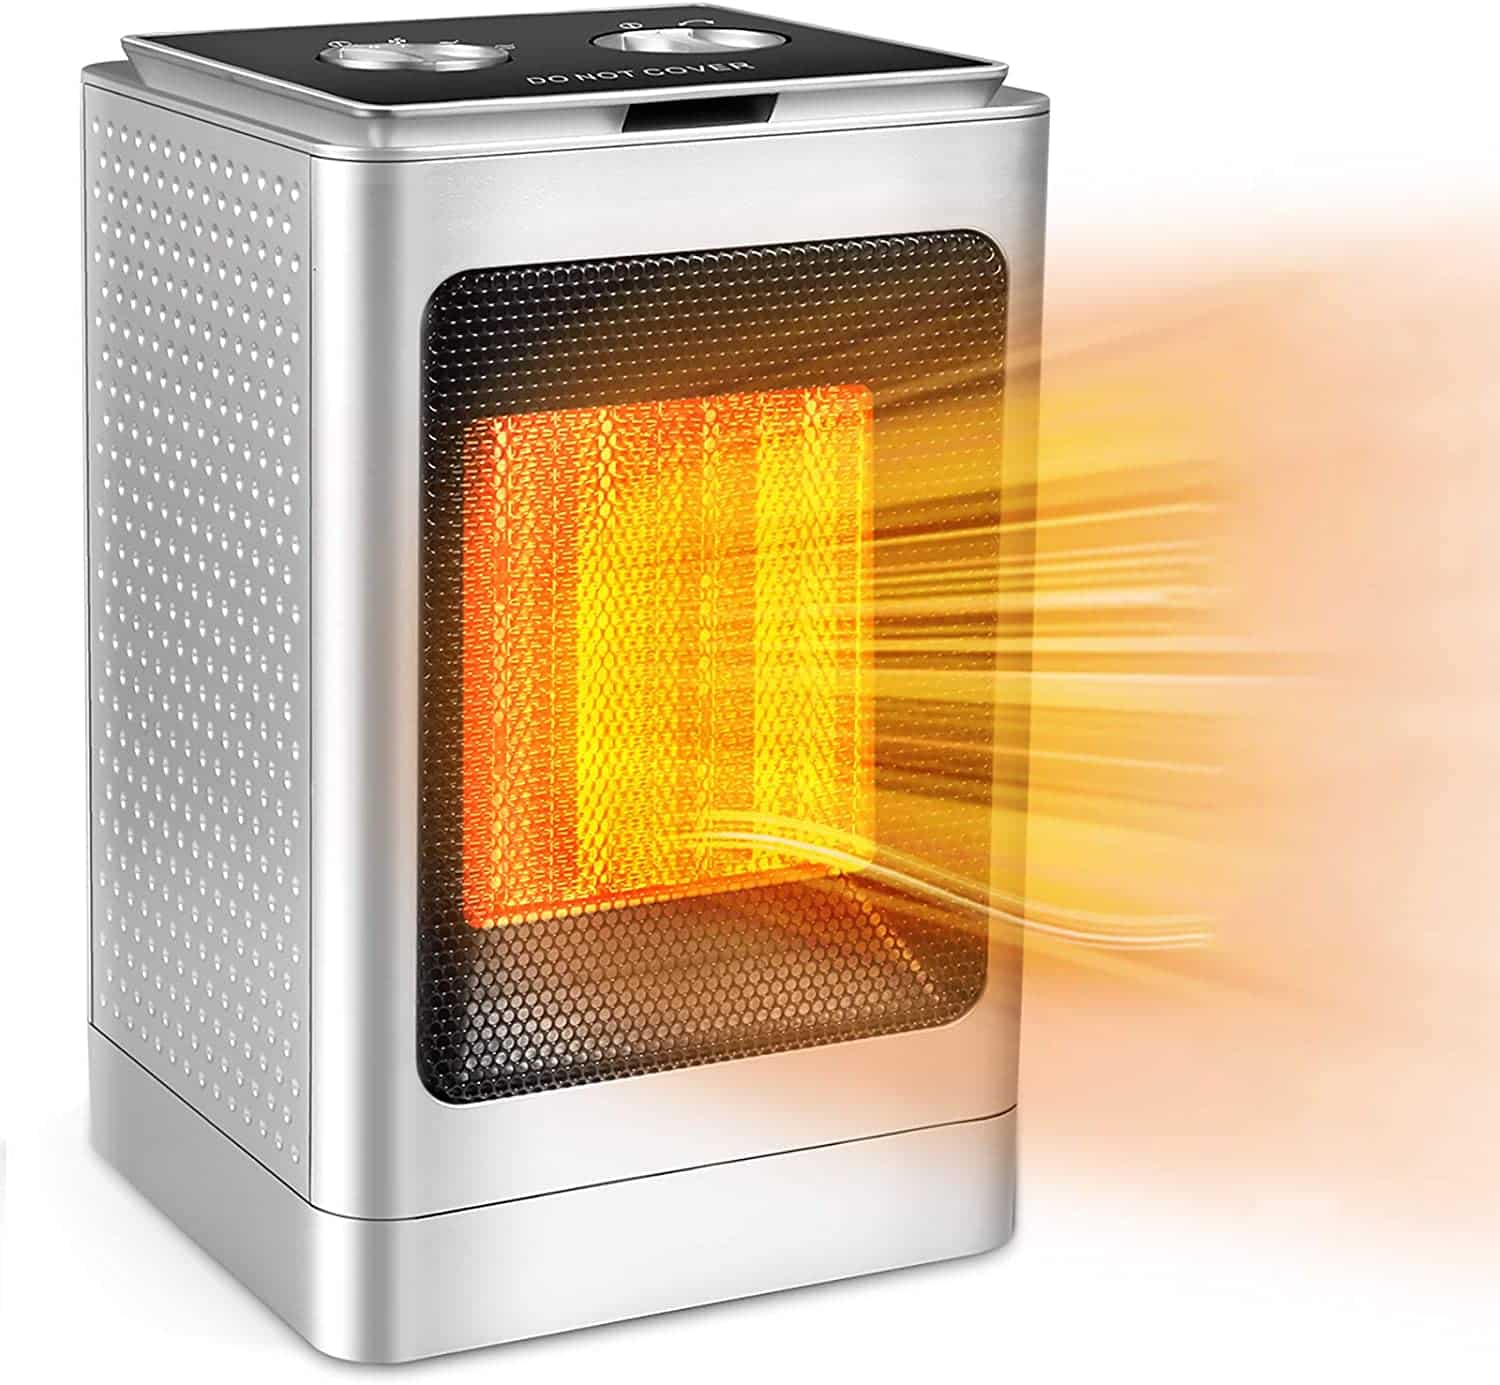 MUDSHI Portable Space Heater Overheat Protection And Tip Over Protection 